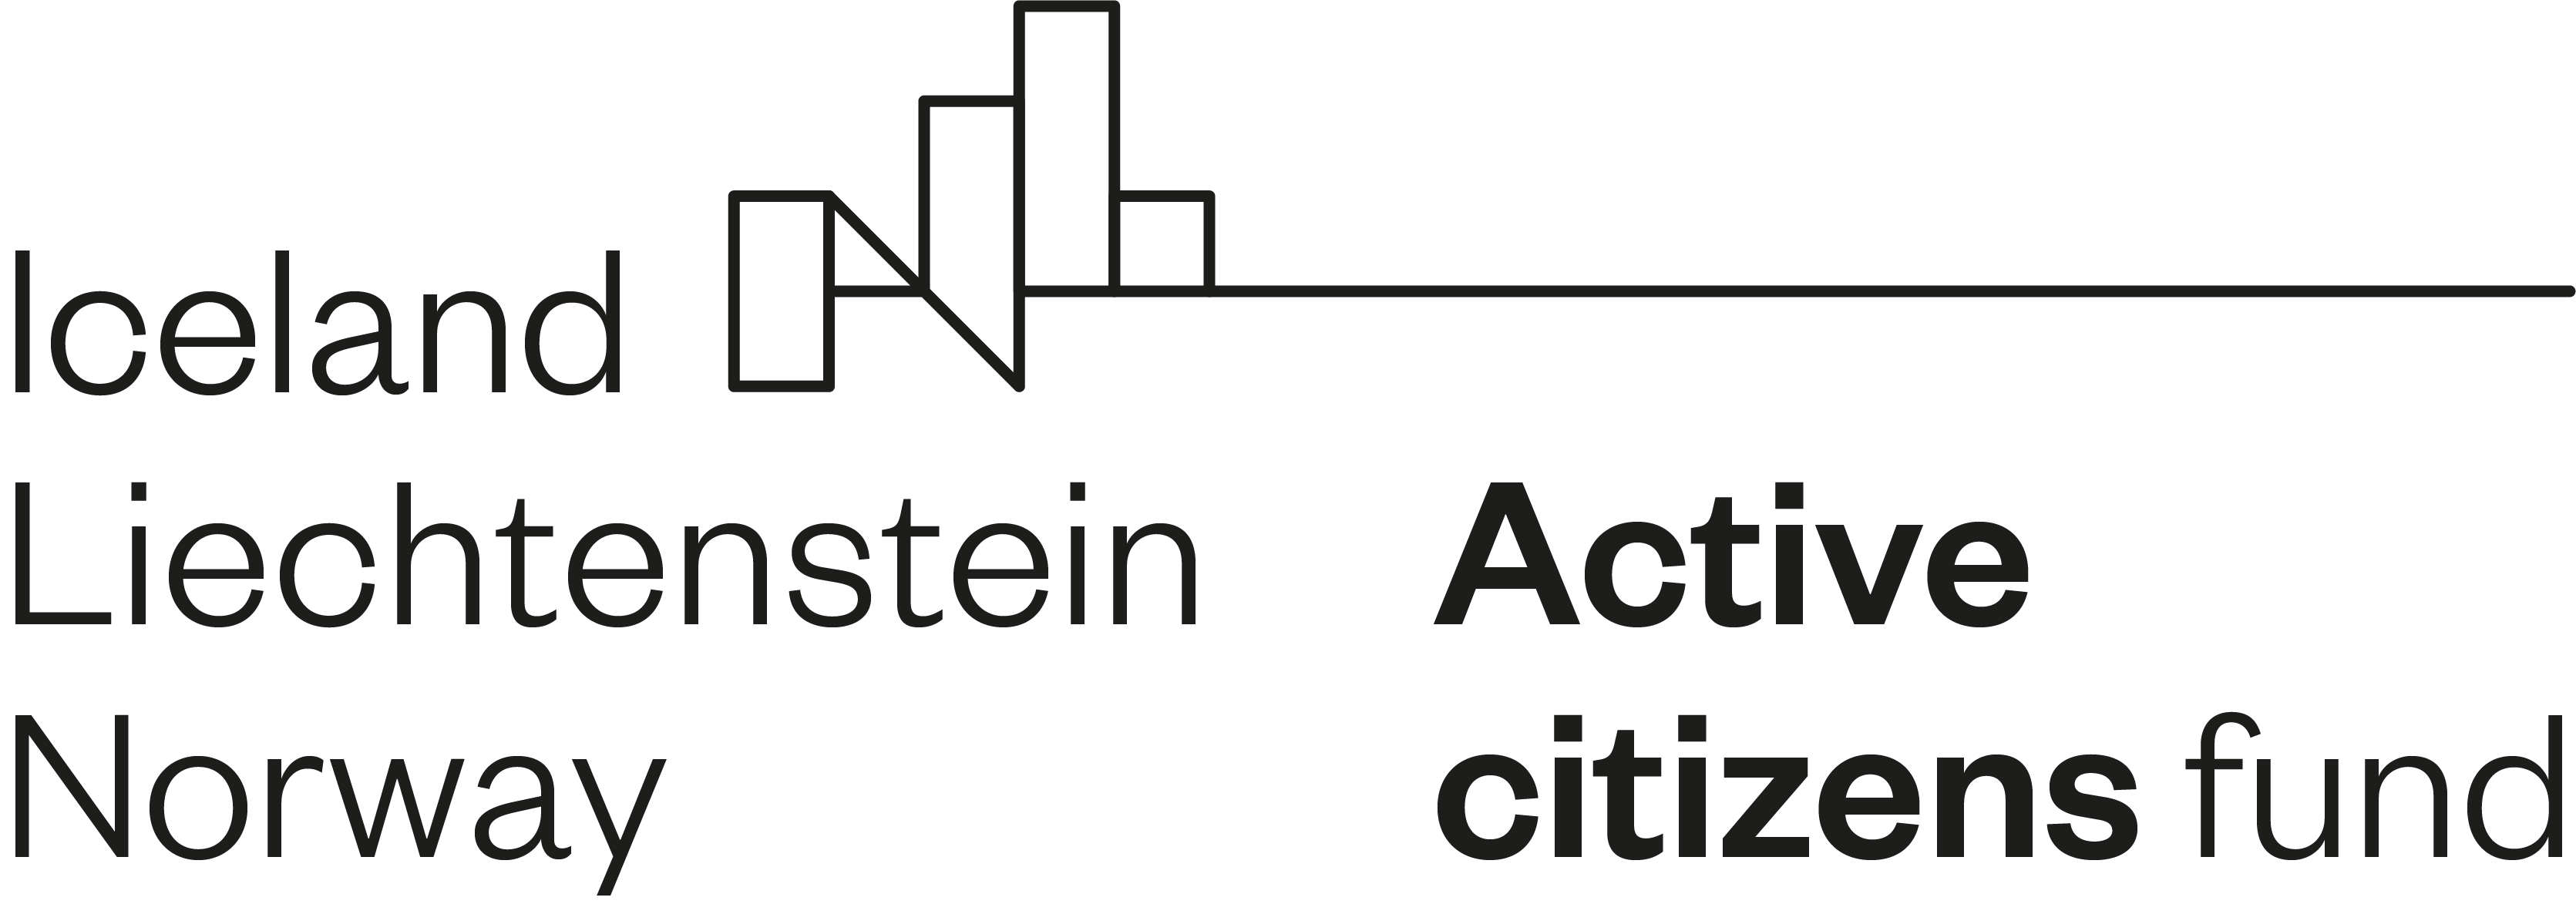 Saystop Active Citizens Fund